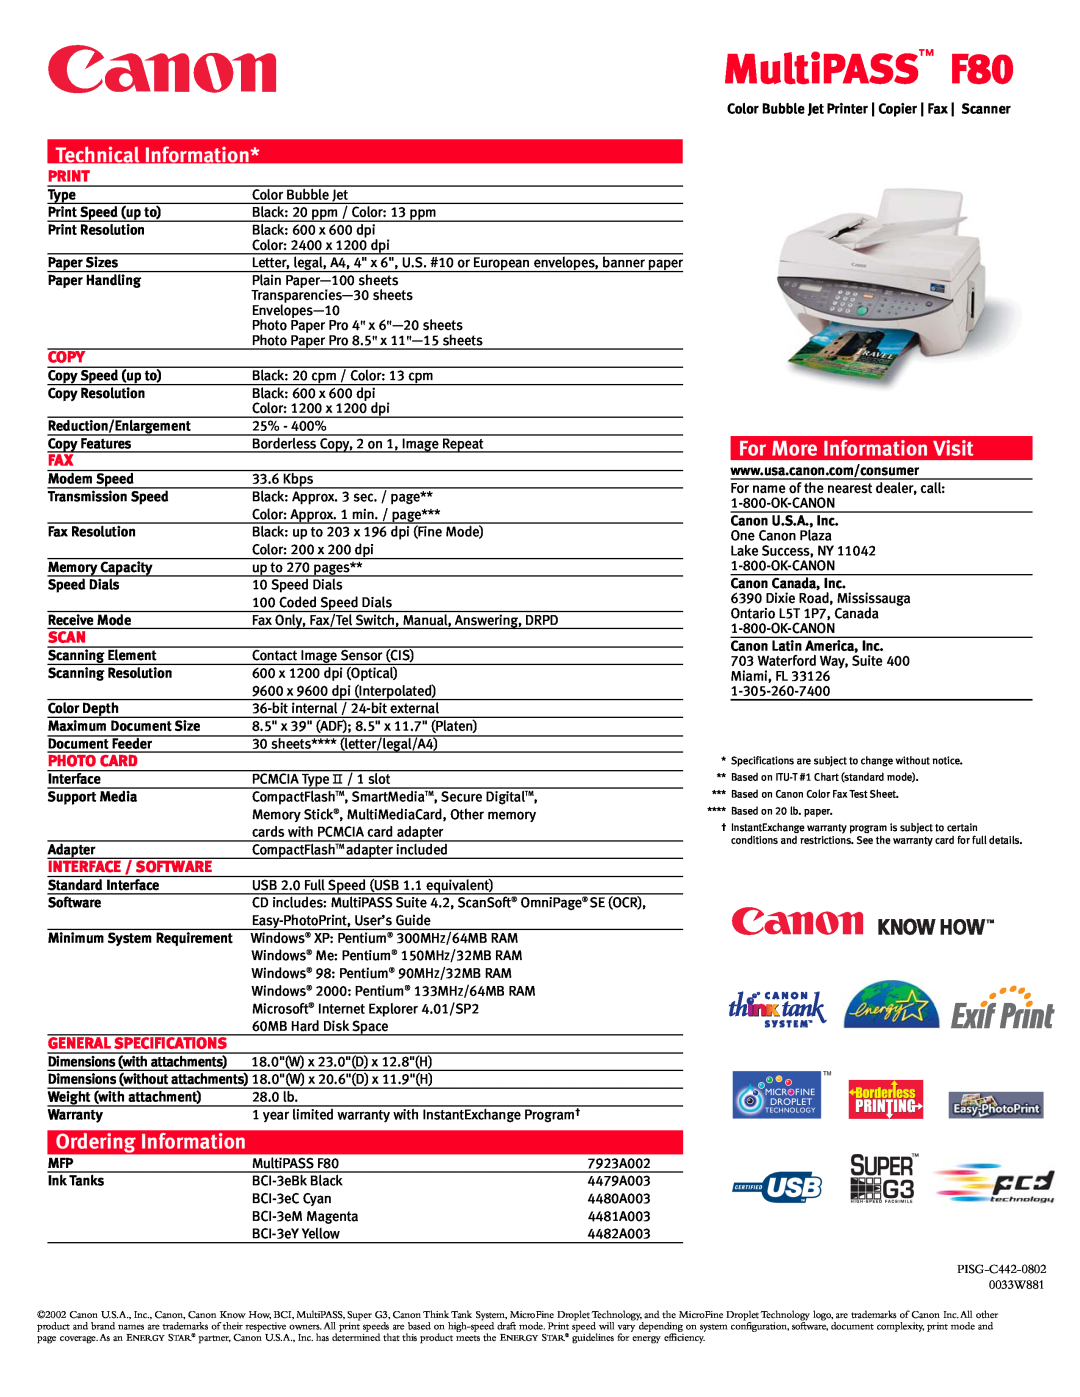 Canon manual MultiPASS F80, Technical Information, For More Information Visit, Ordering Information, Print, Copy, Scan 